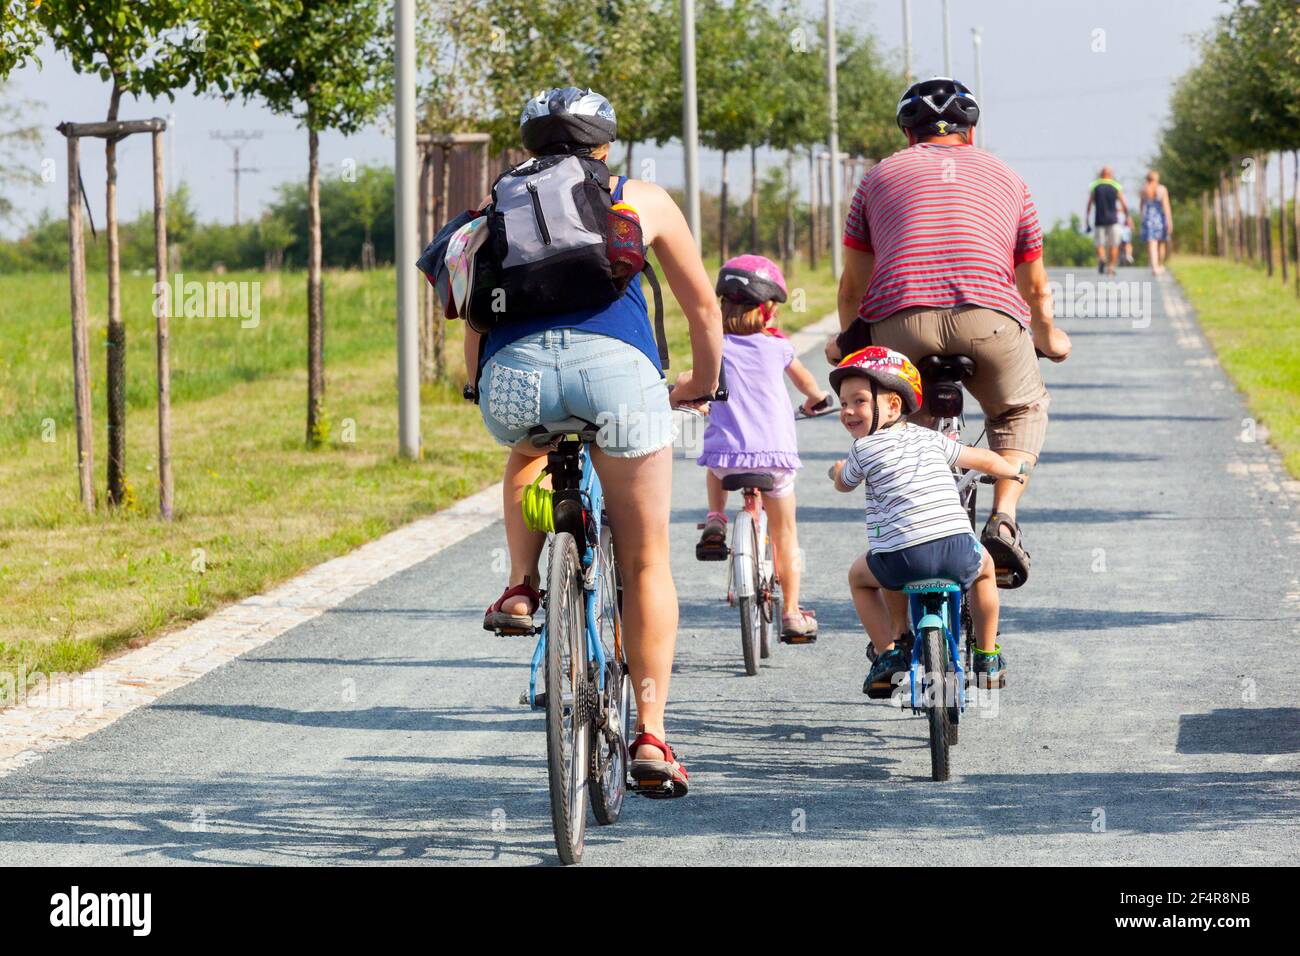 Family on bike rear view bicycle, Family out cycling children riding bikes Children on bike ride Stock Photo